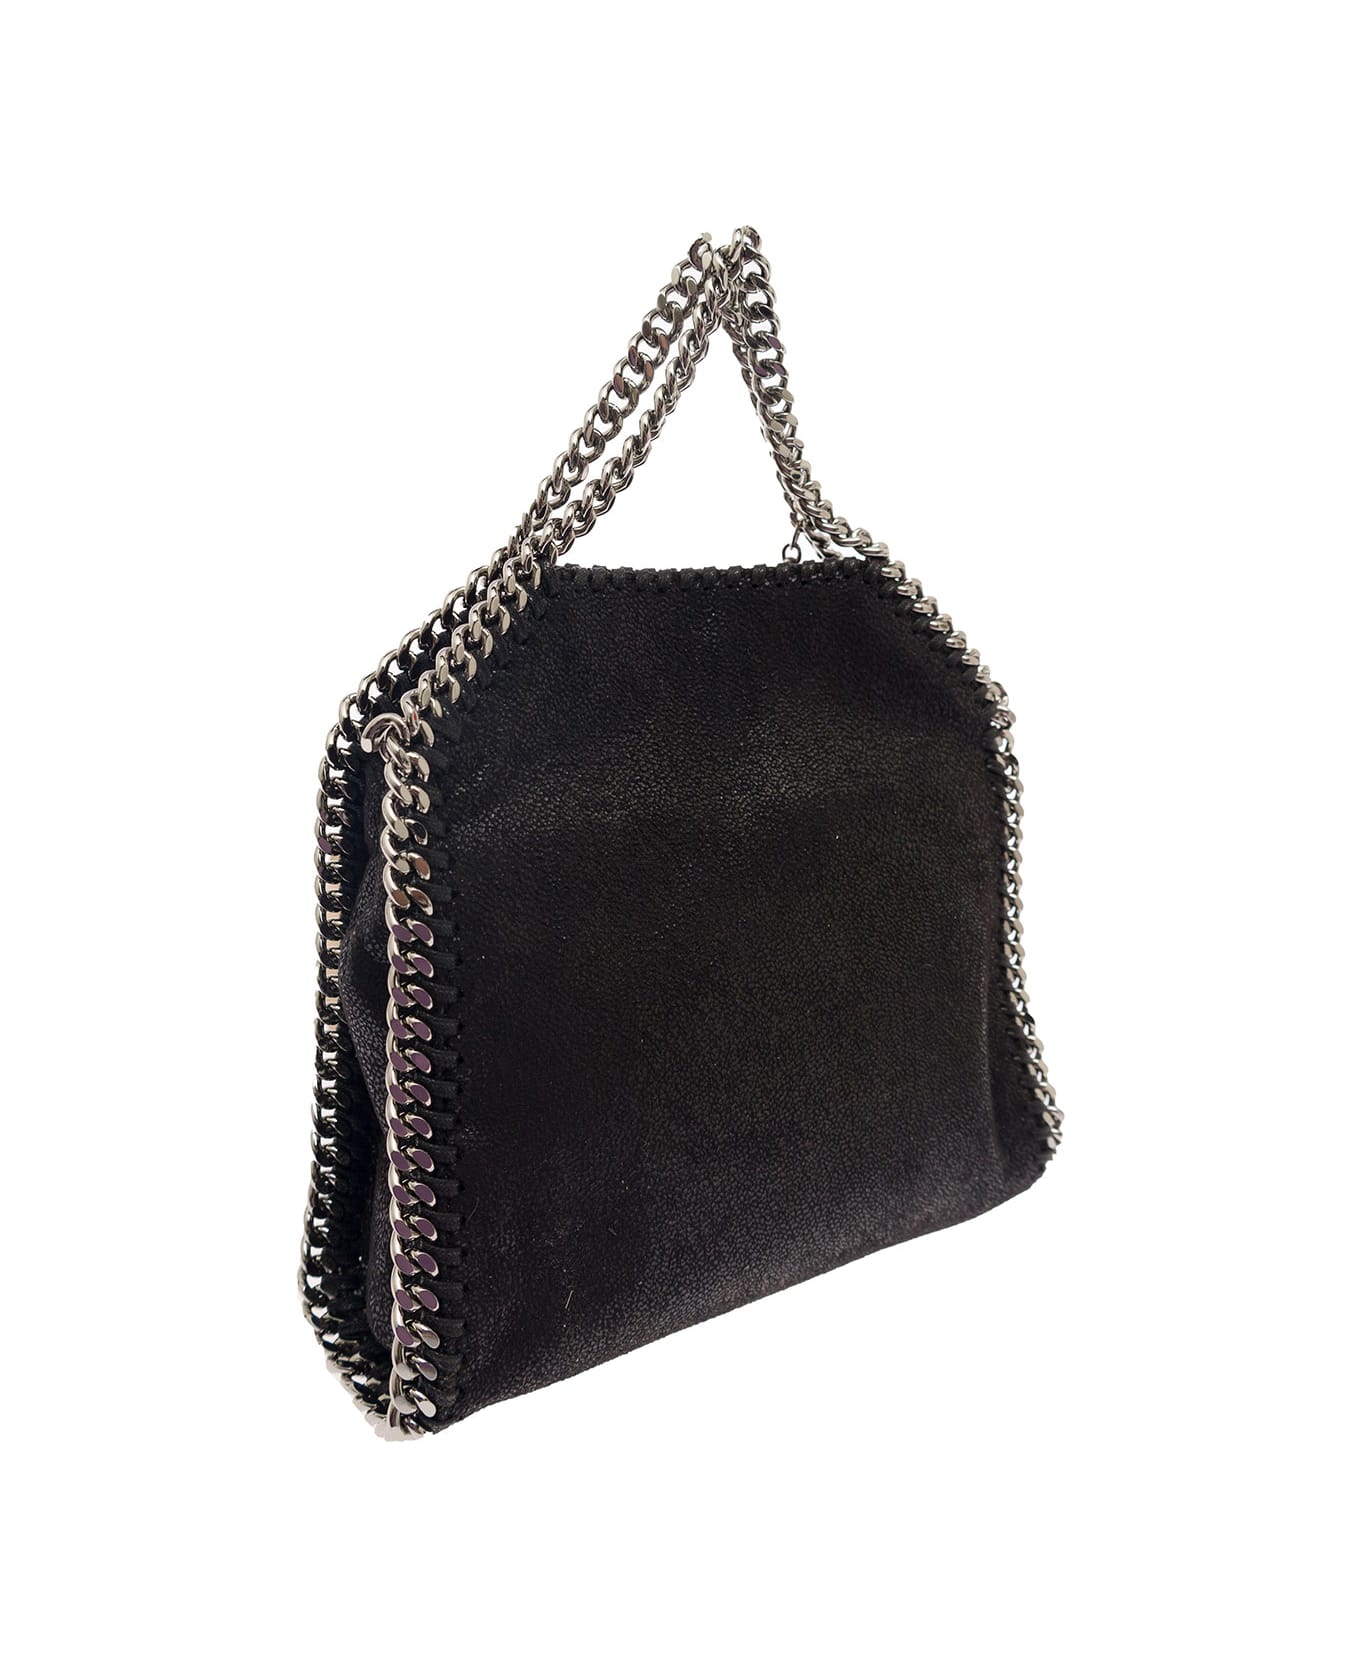 Stella McCartney '3chain' Mini Black Tote Bag With Logo Engraved On Charm In Faux Leather Woman - Black